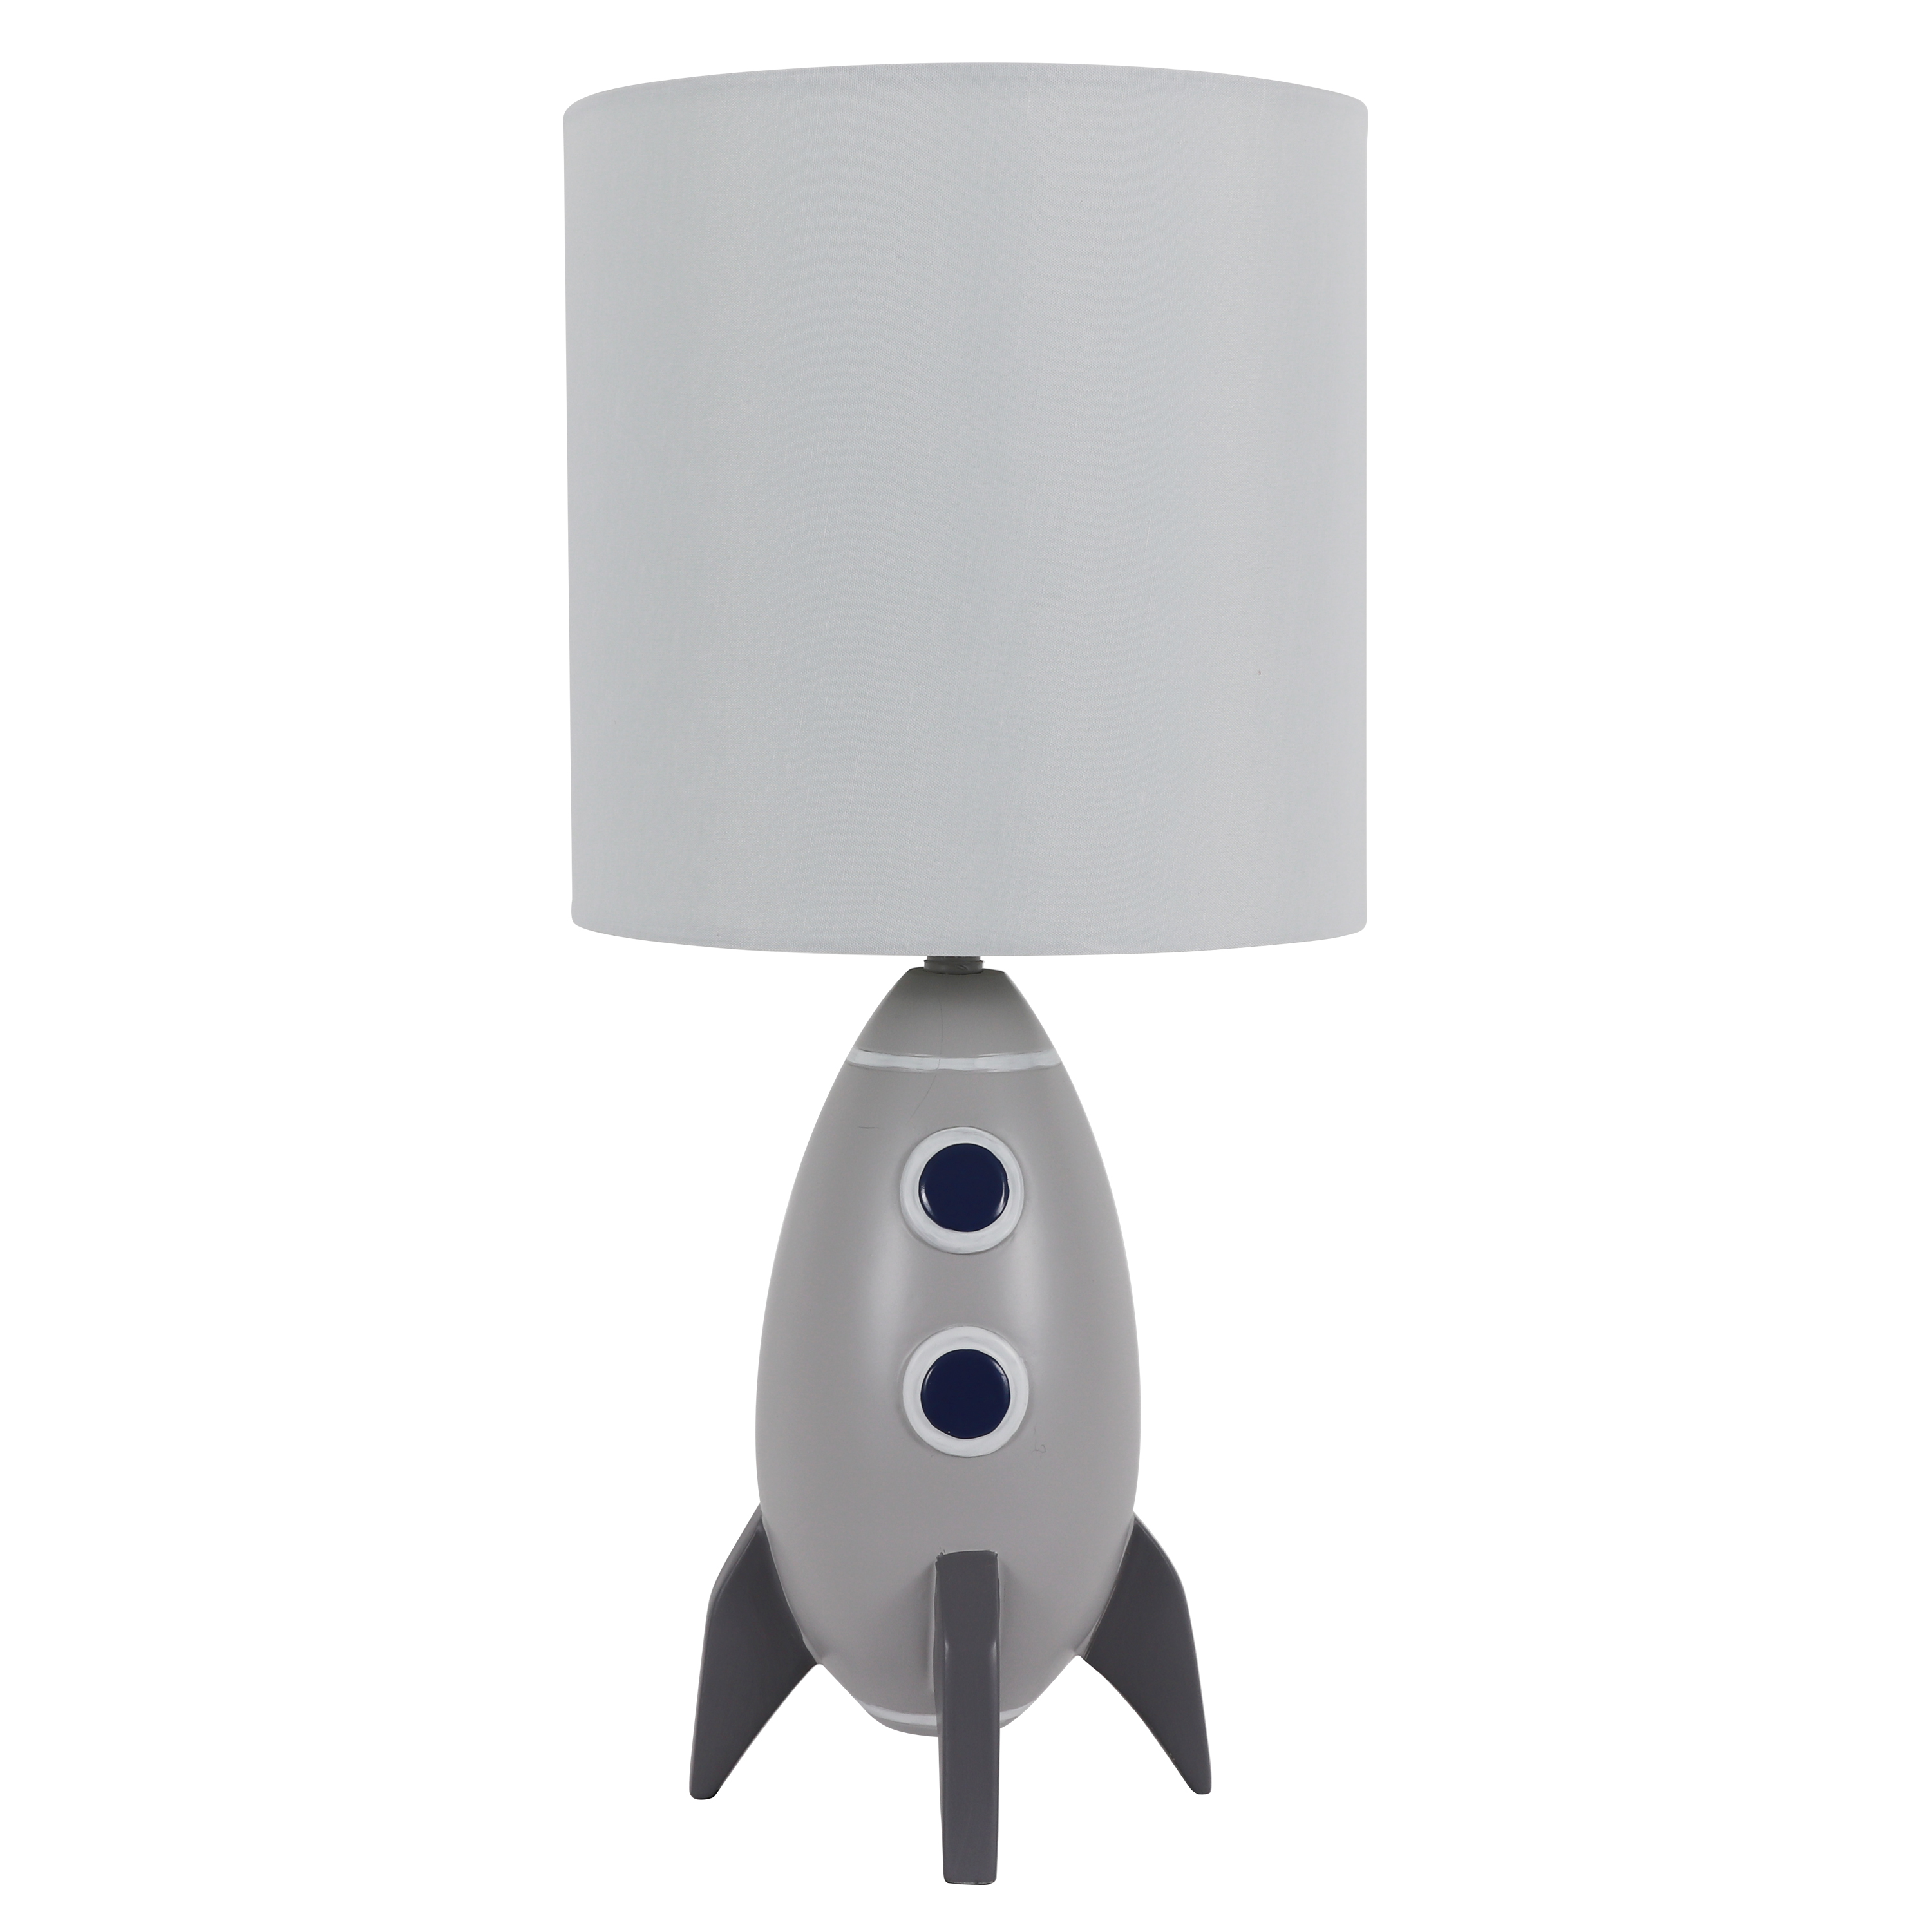 Kids Rocket Table Lamp, Gray Finish, Your Zone - image 1 of 10